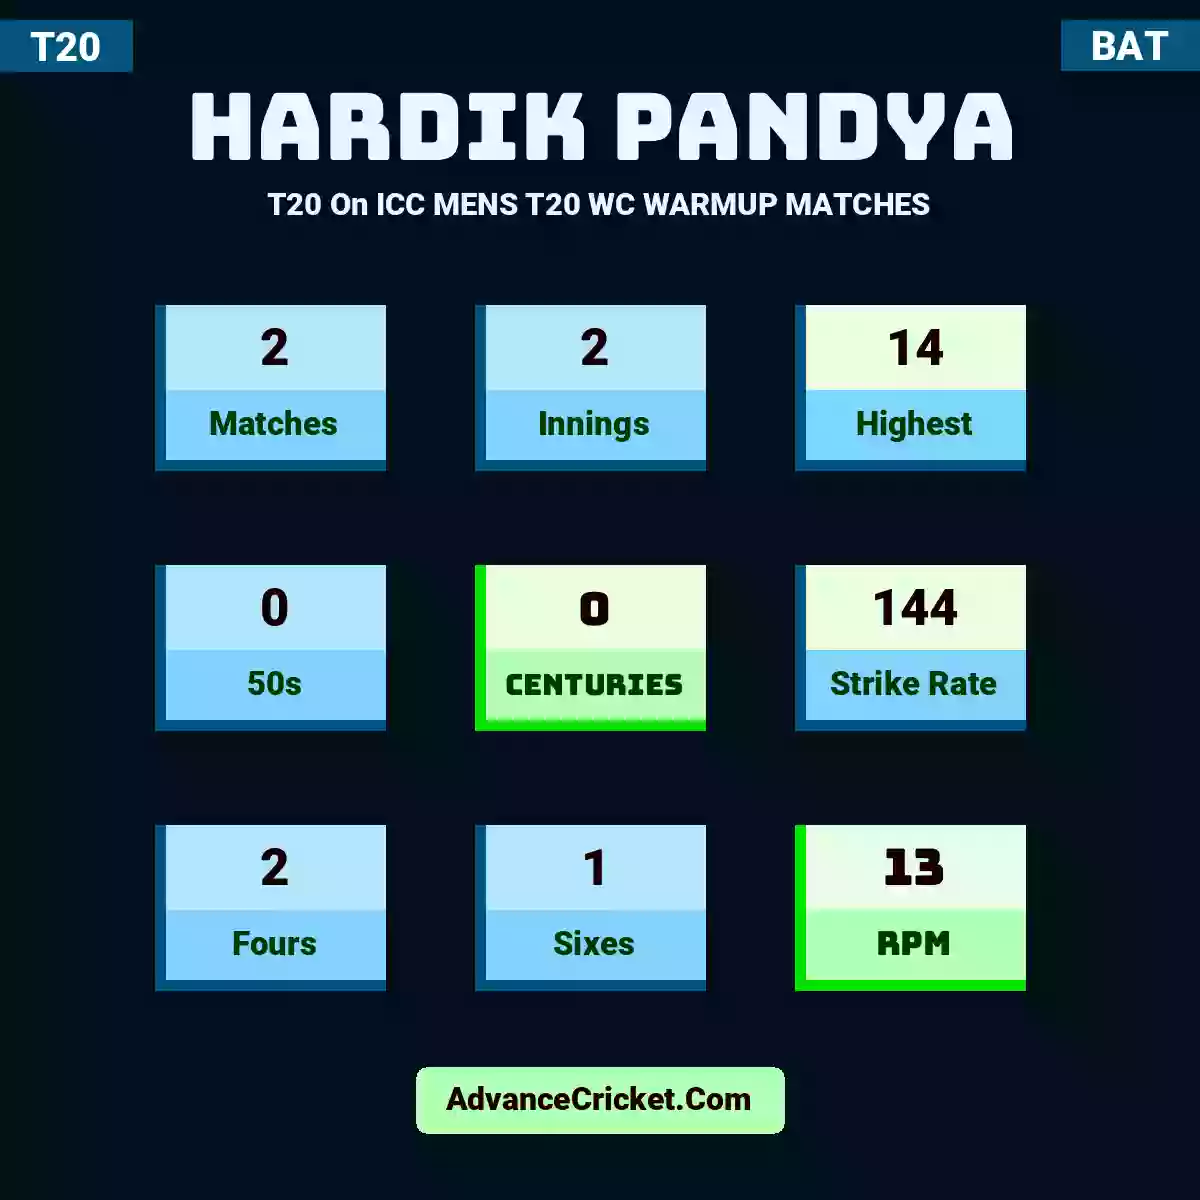 Hardik Pandya T20  On ICC MENS T20 WC WARMUP MATCHES, Hardik Pandya played 2 matches, scored 14 runs as highest, 0 half-centuries, and 0 centuries, with a strike rate of 144. H.Pandya hit 2 fours and 1 sixes, with an RPM of 13.